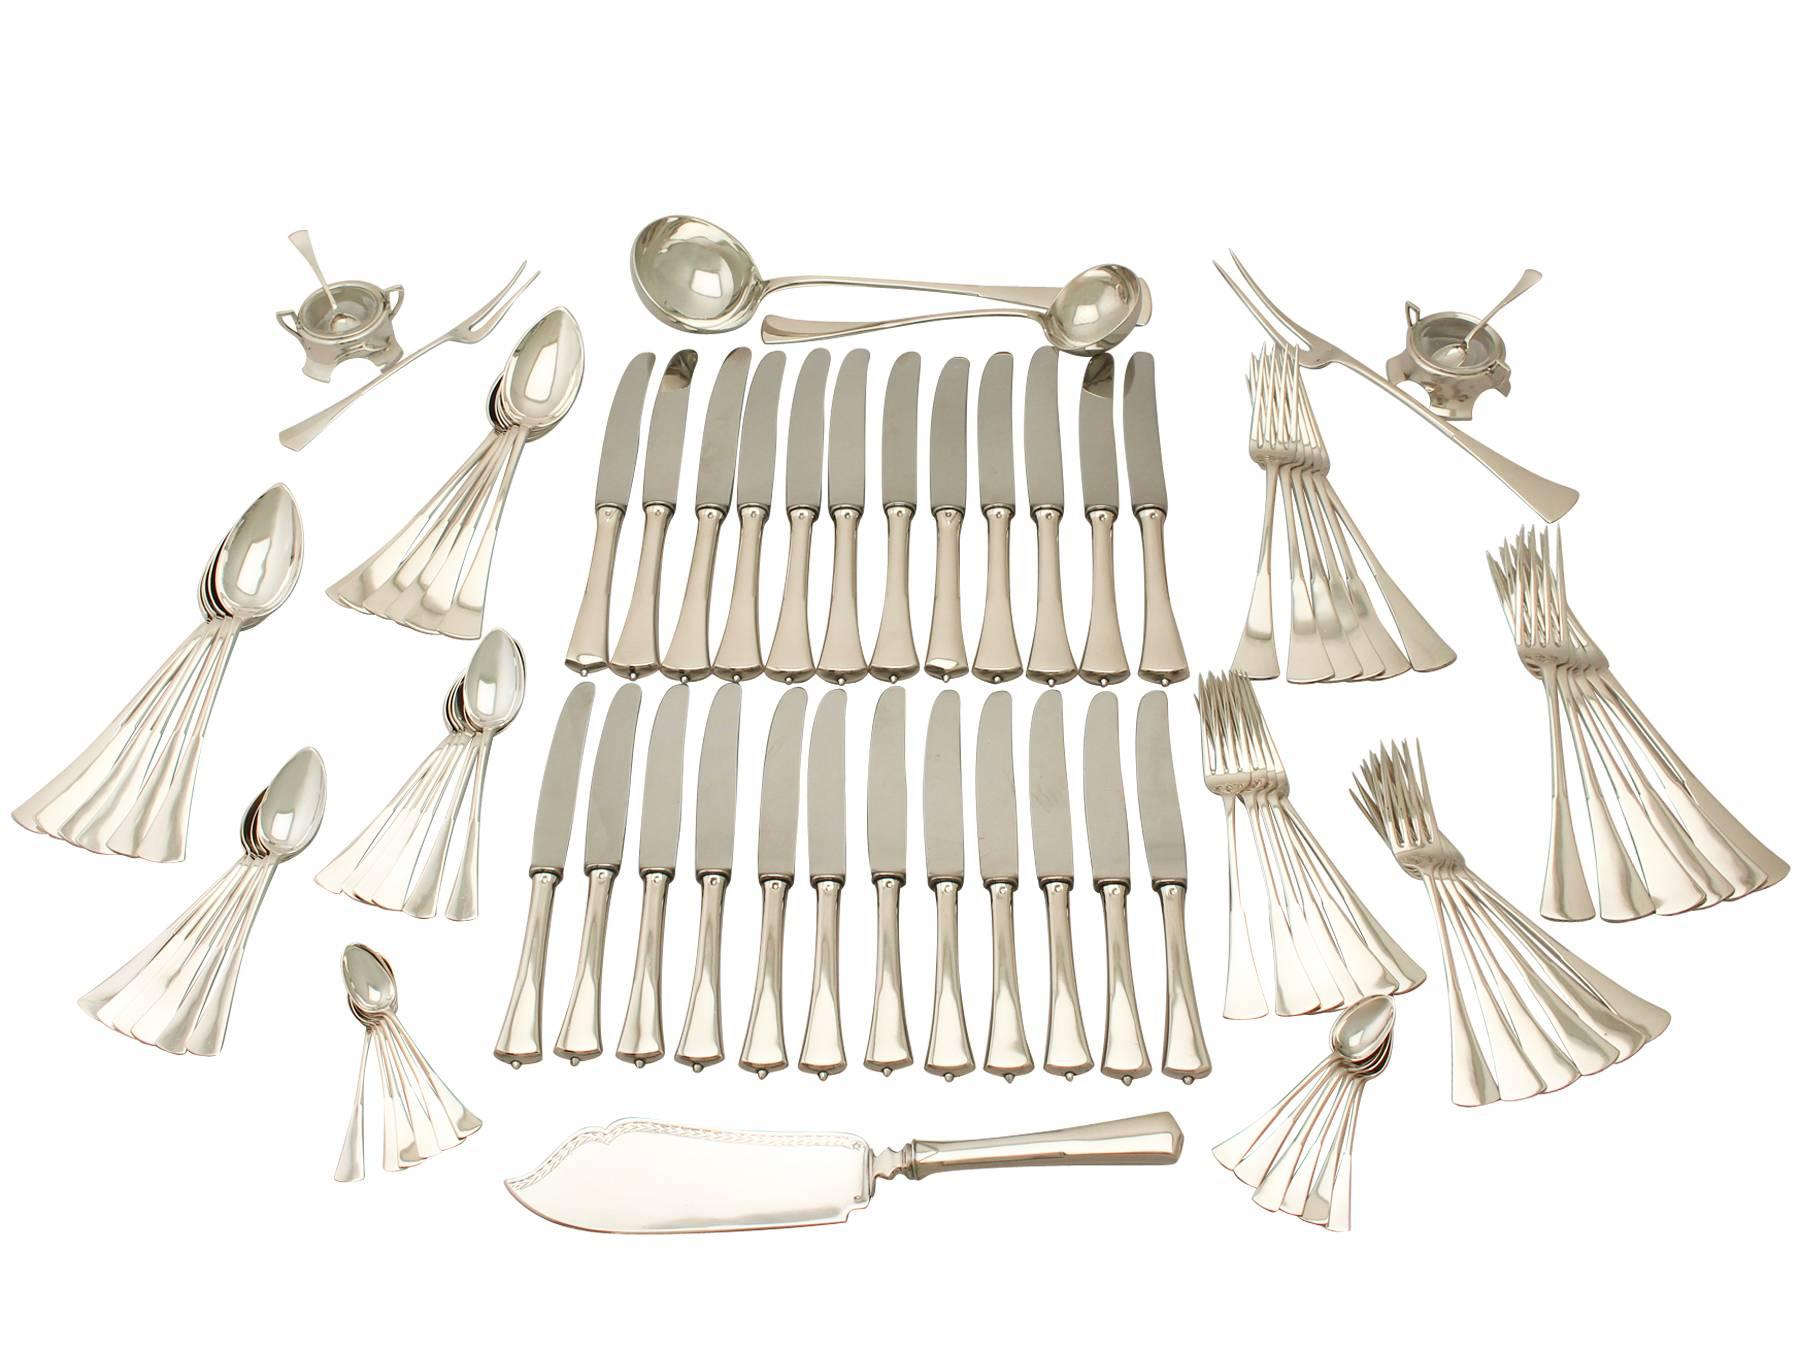 An exceptional, fine and impressive antique Austro-Hungarian silver straight flatware service for twelve persons in the Art Deco style; an addition to our canteen of cutlery collection.

The pieces of this exceptional antique Austro-Hungarian